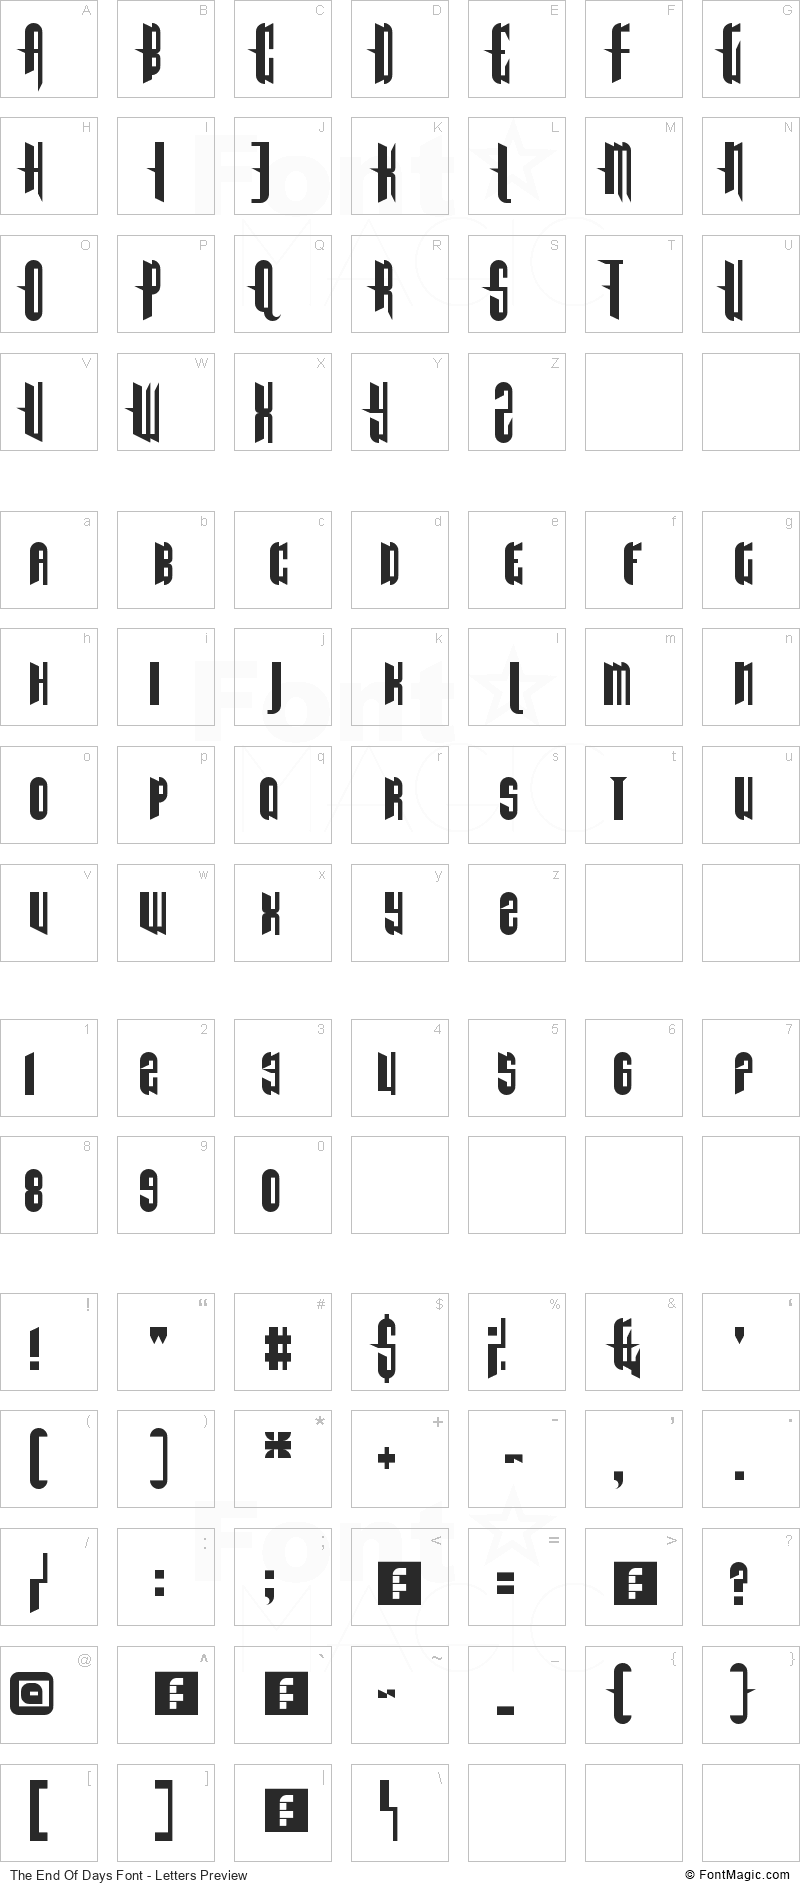 The End Of Days Font - All Latters Preview Chart